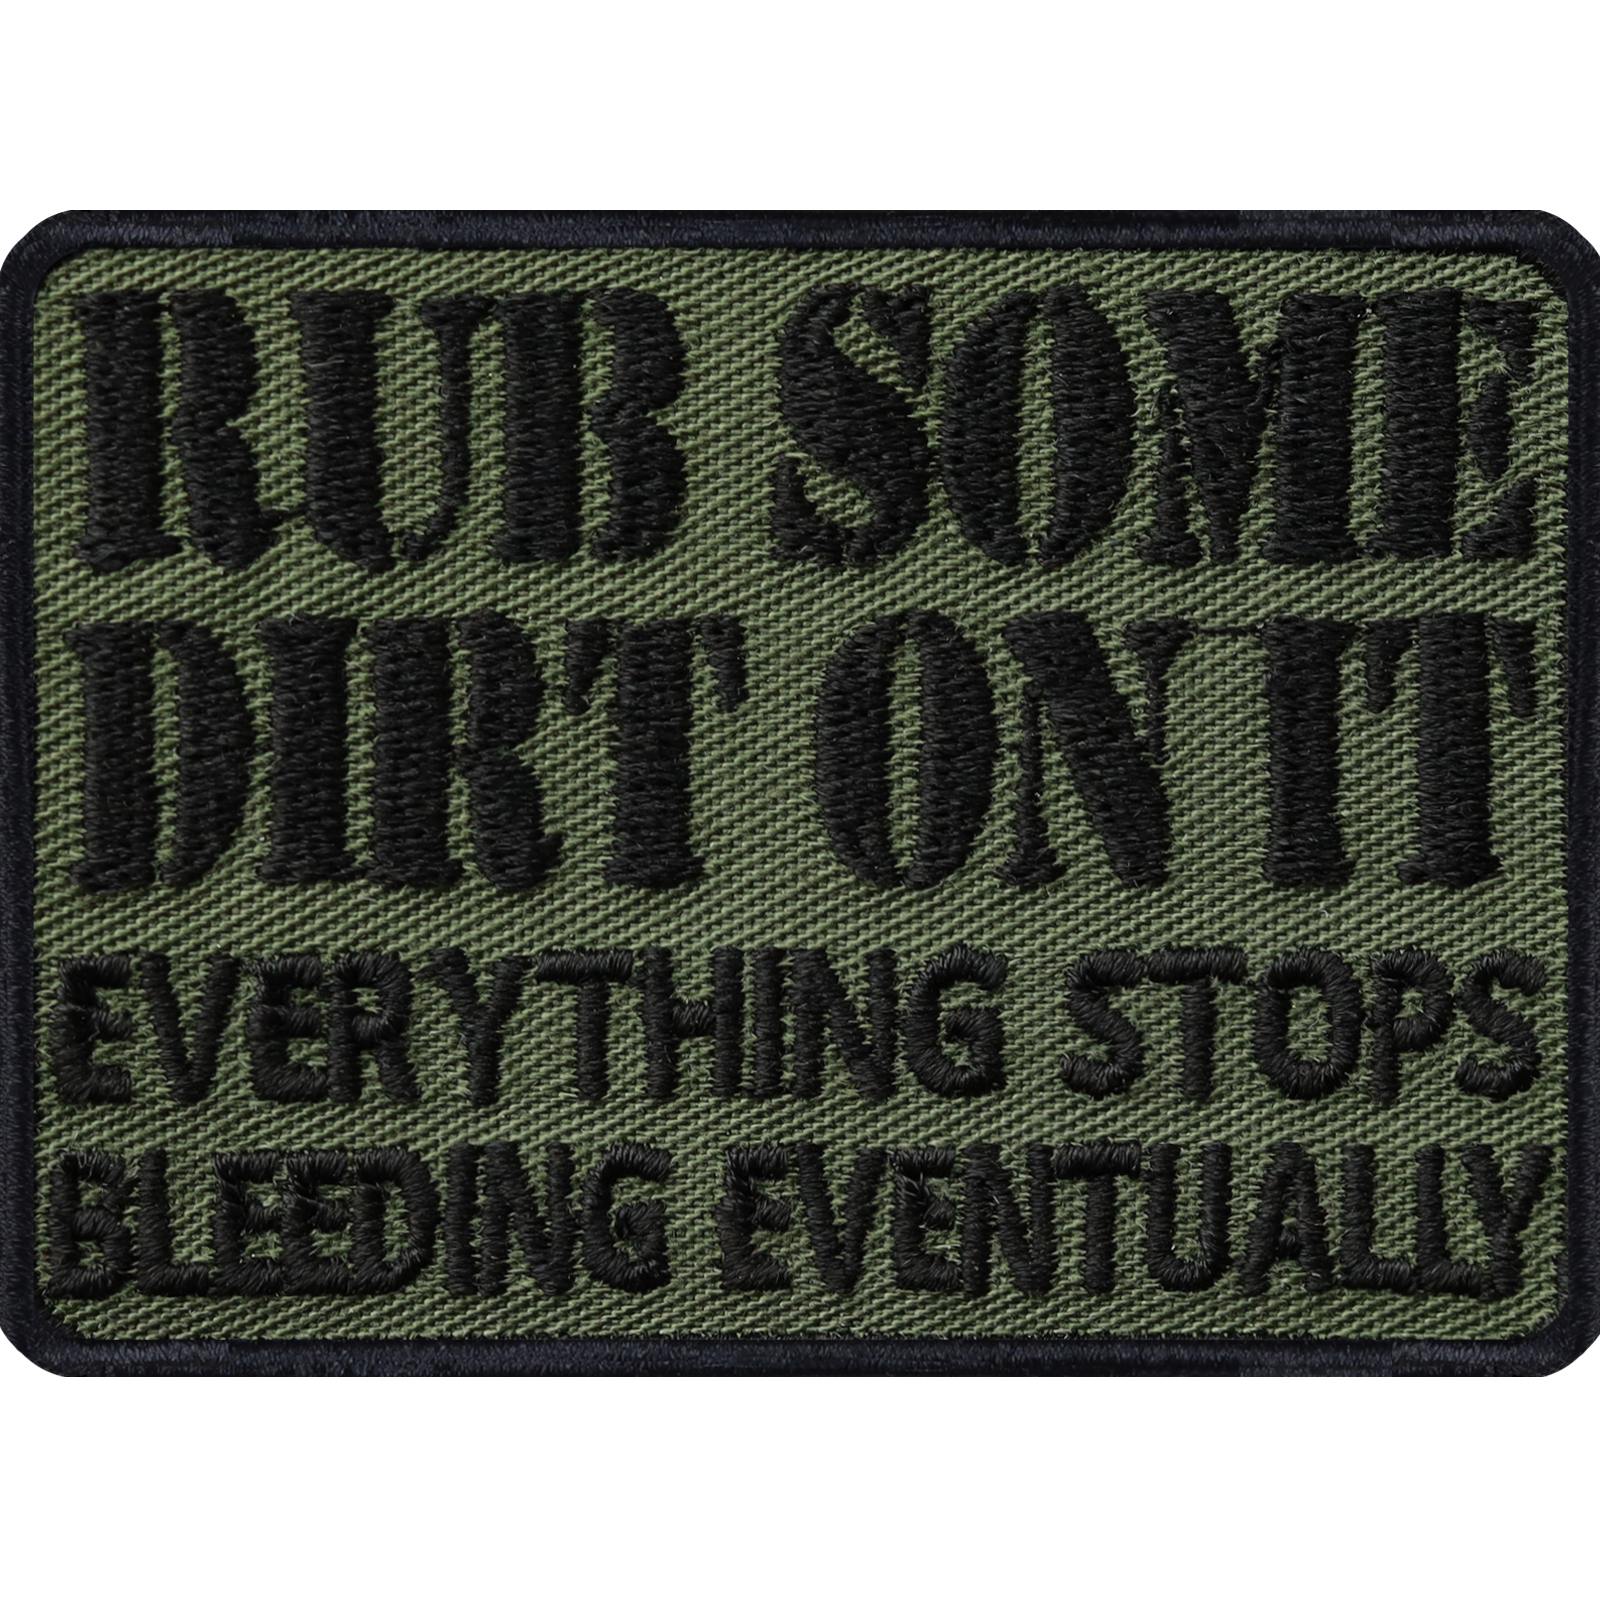 Rub some dirt on it, everything stops bleeding eventually - Patch